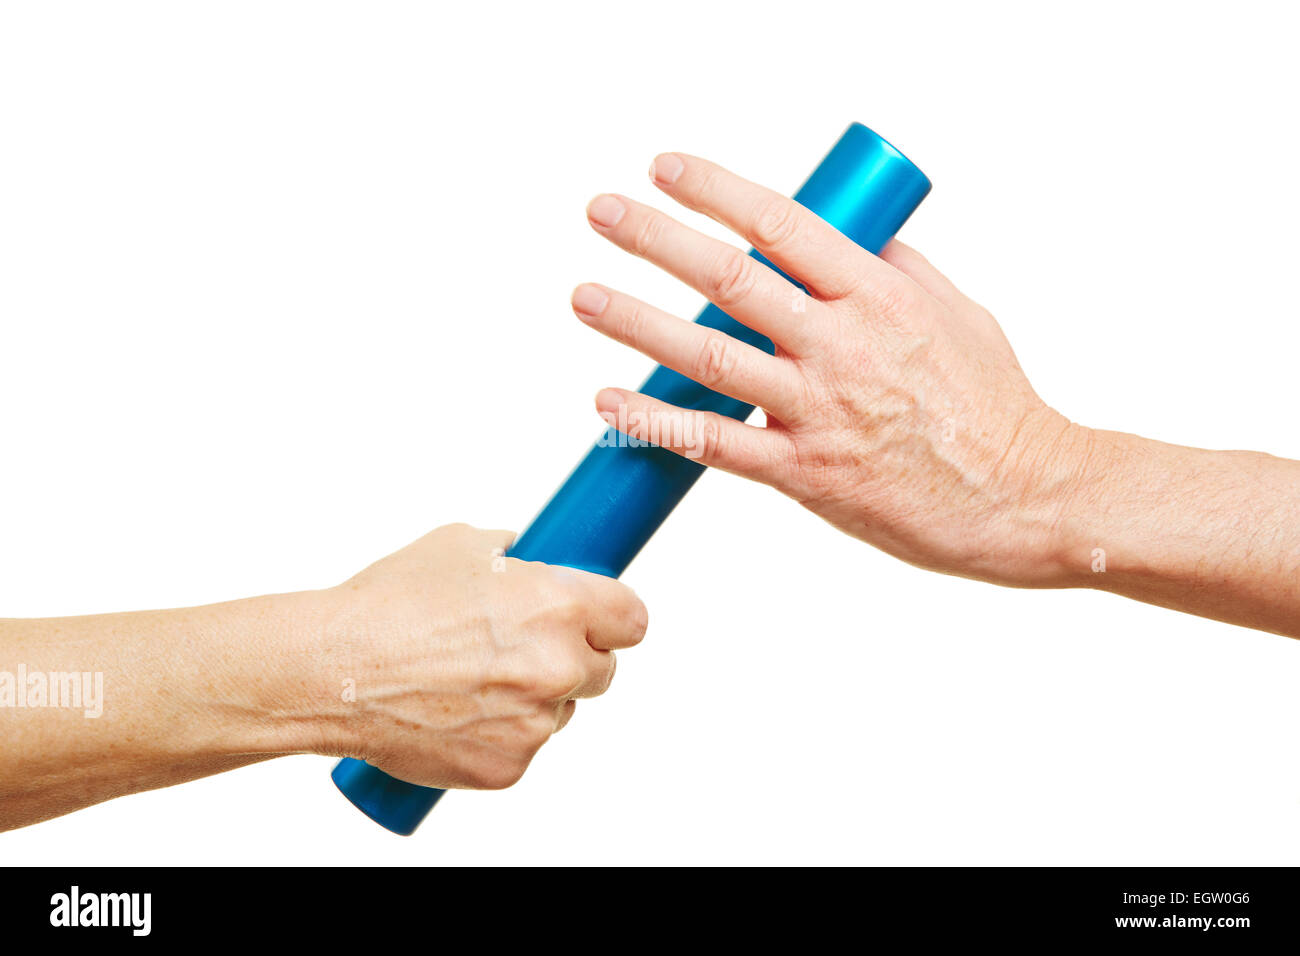 Hands offering a blue relay baton during running race Stock Photo